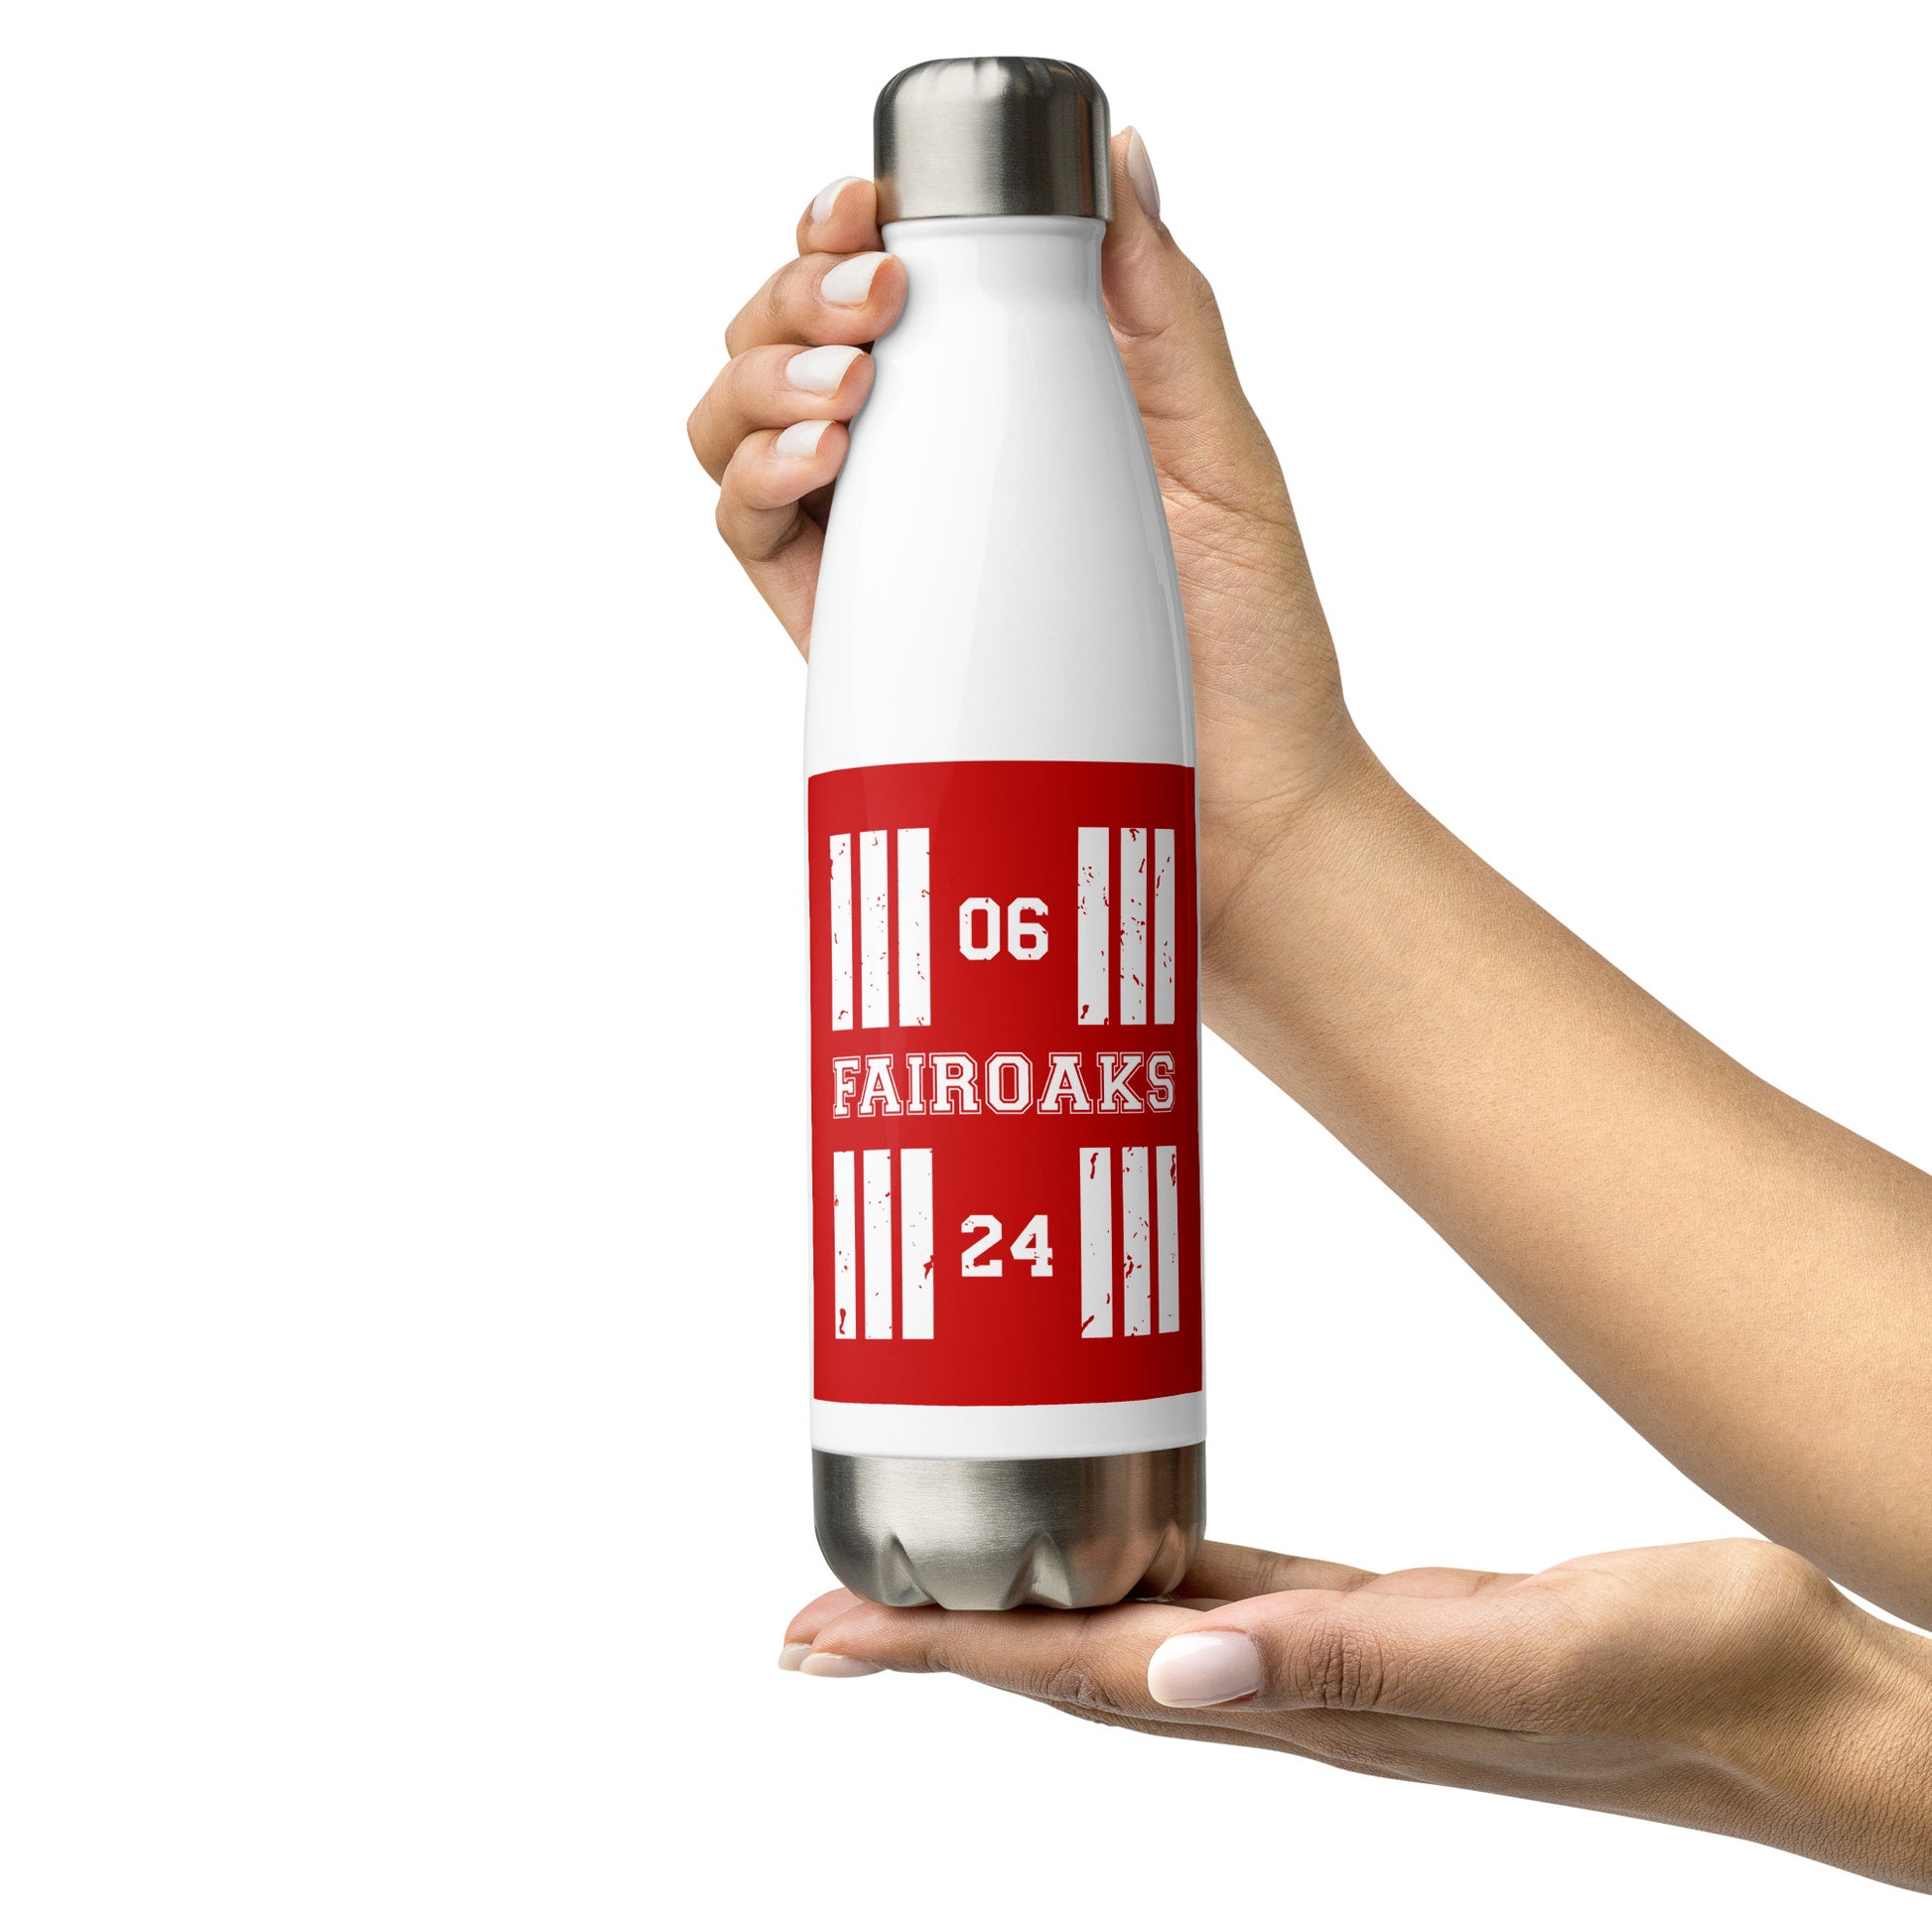 The Fairoaks Airport runway designator water bottle features a red print with the airport's name and designator framed by stylised threshold markings showing through.